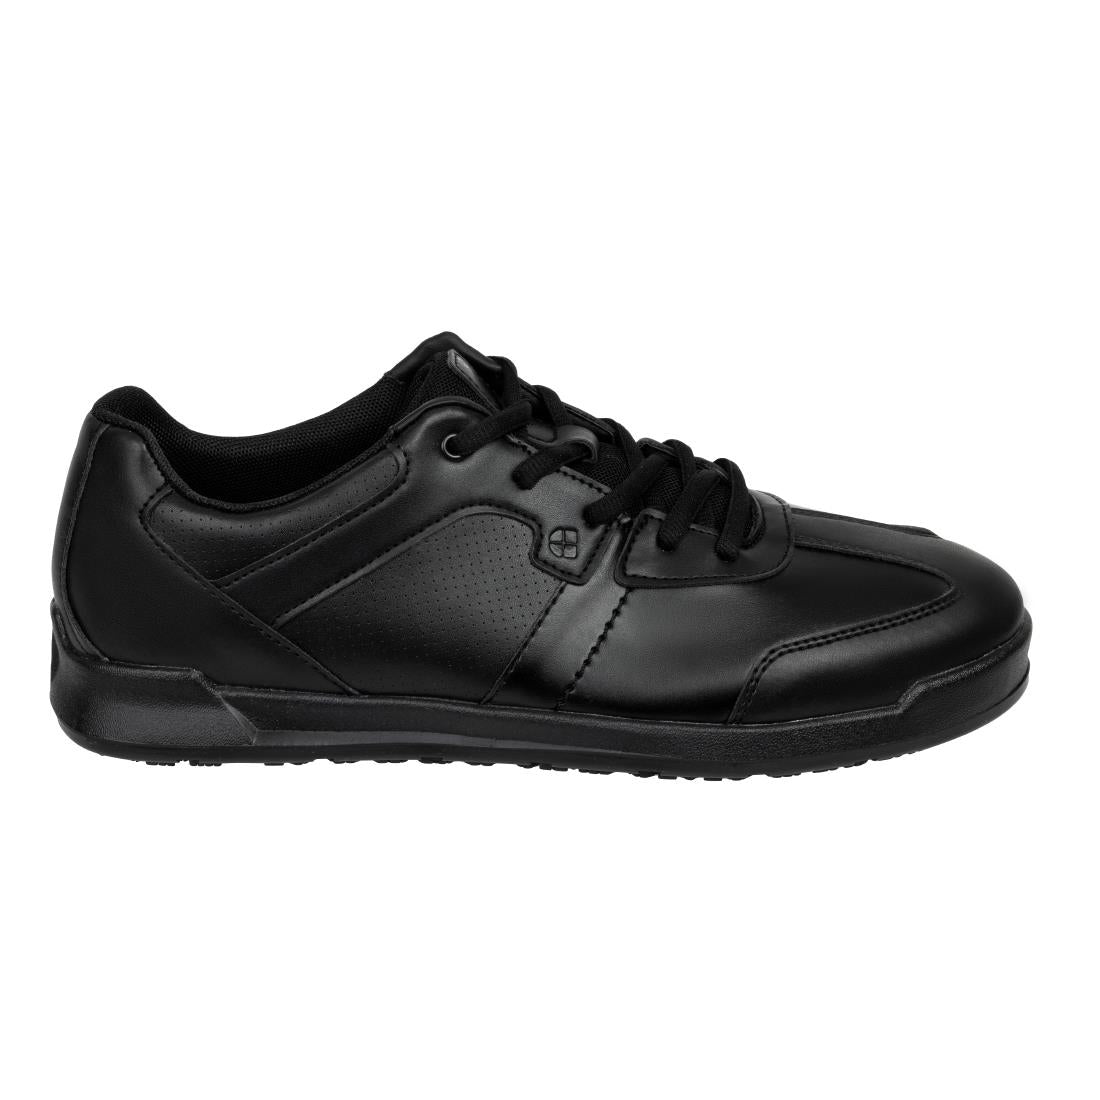 BB585-39 Shoes for Crews Freestyle Trainers Black Size 39